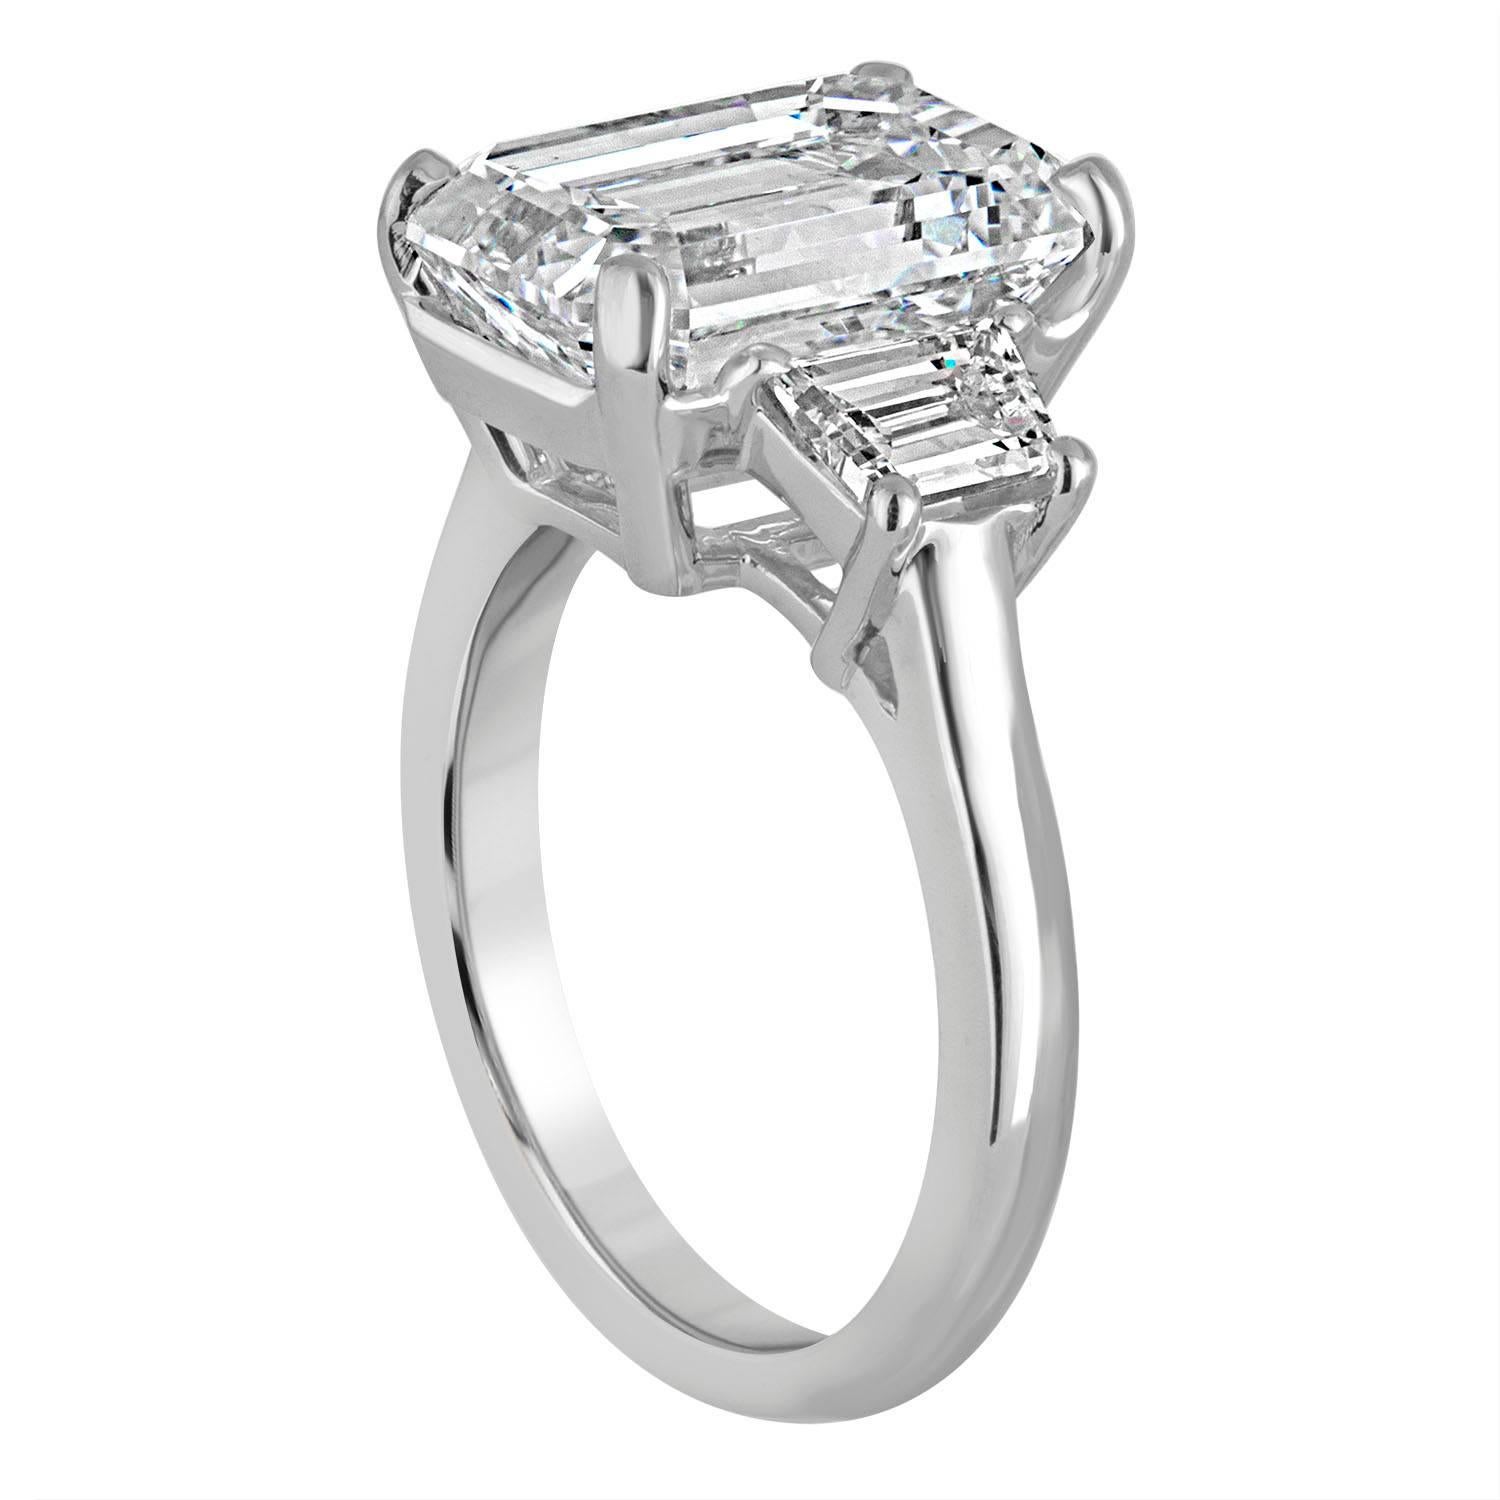 Classic Three stone ring. A 6.19 Carat Emerald Cut Diamond in the Center, is GIA certified as G in Color and VVS2 in Clarity. This Emerald Cut is set in Platinum Hand Made mounting with Two Trapezoids, 1.10 CT TWT.